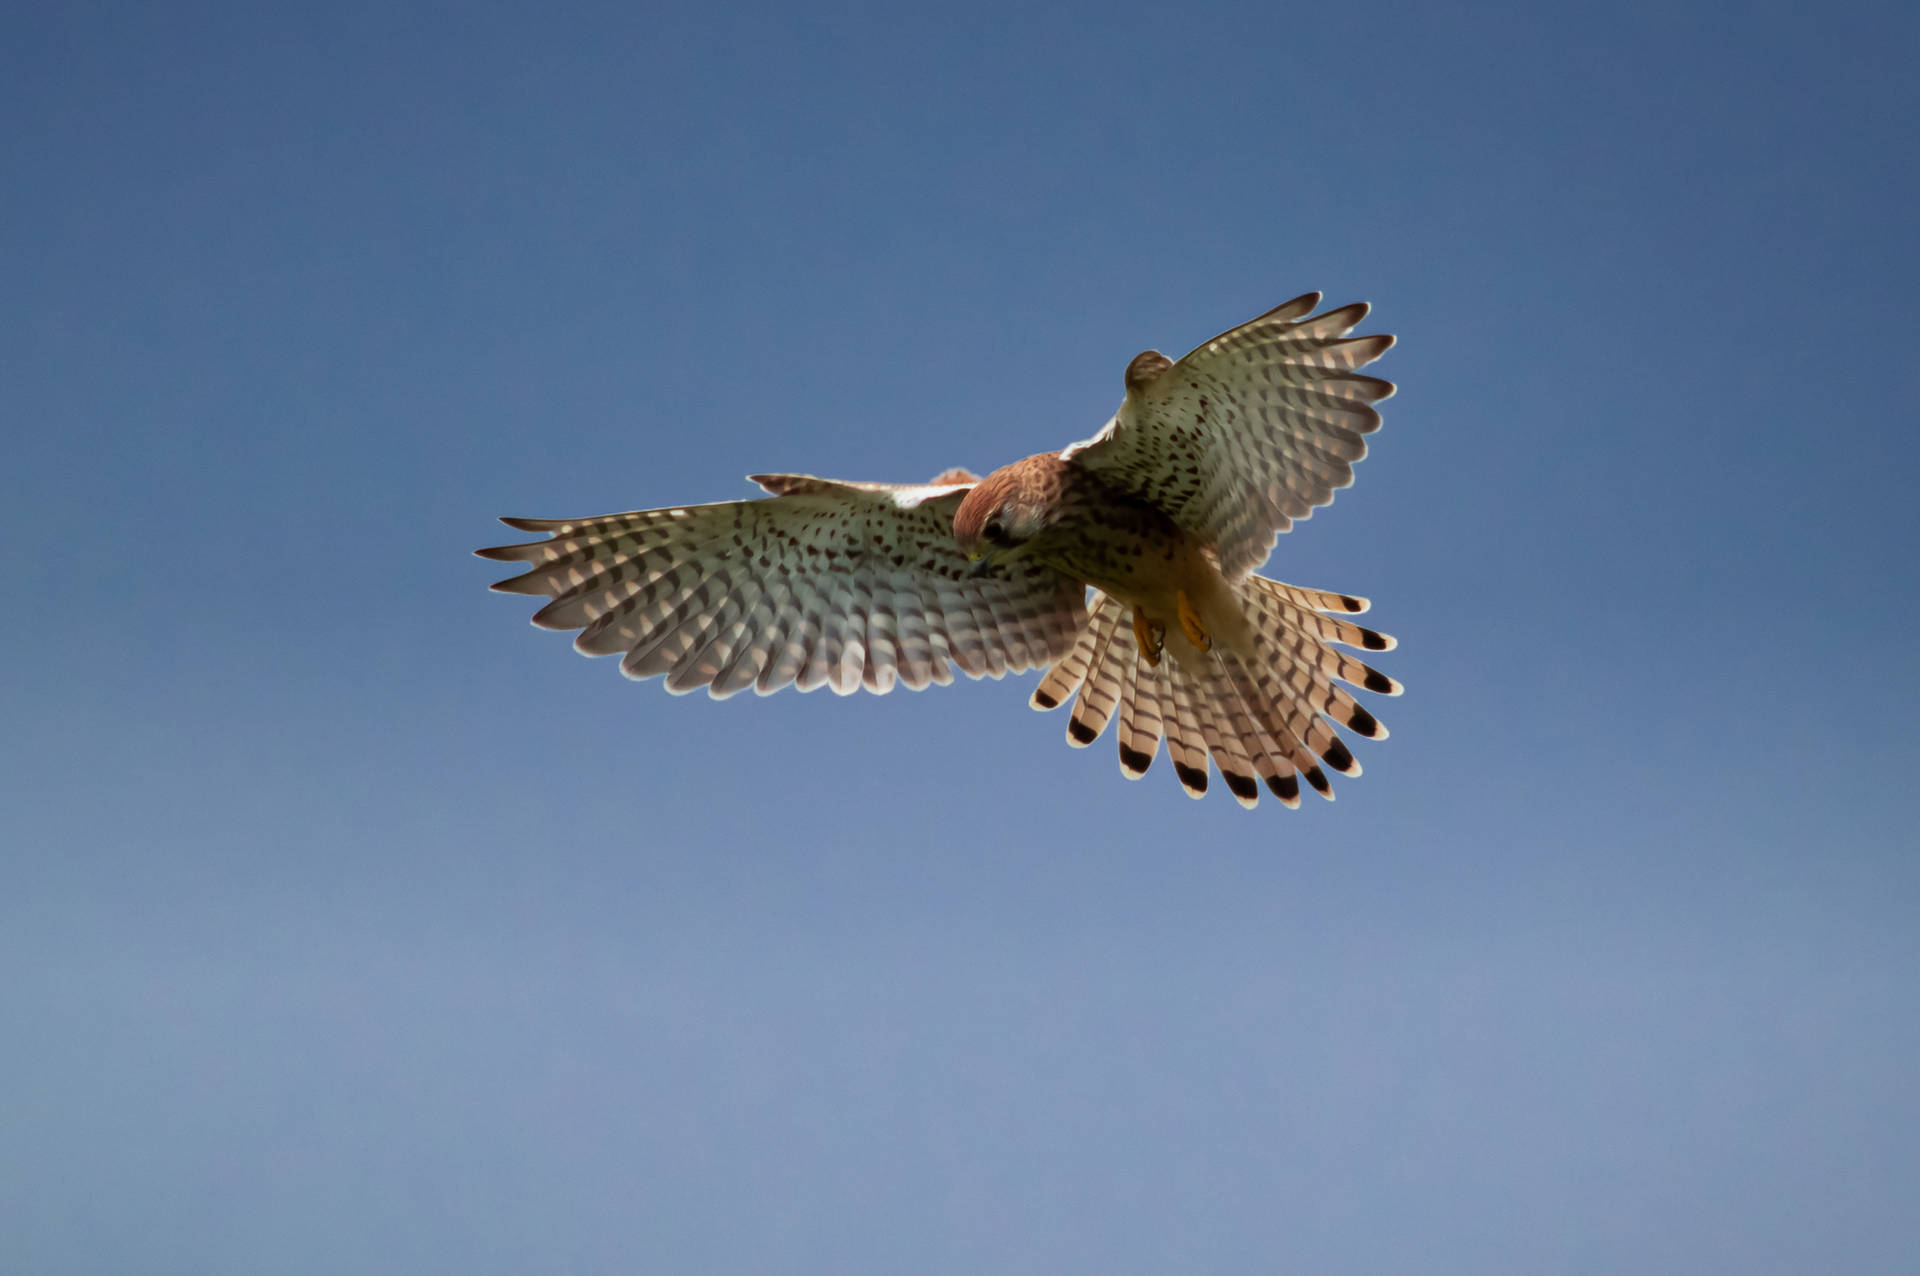 Falcon With Wings Spread Out